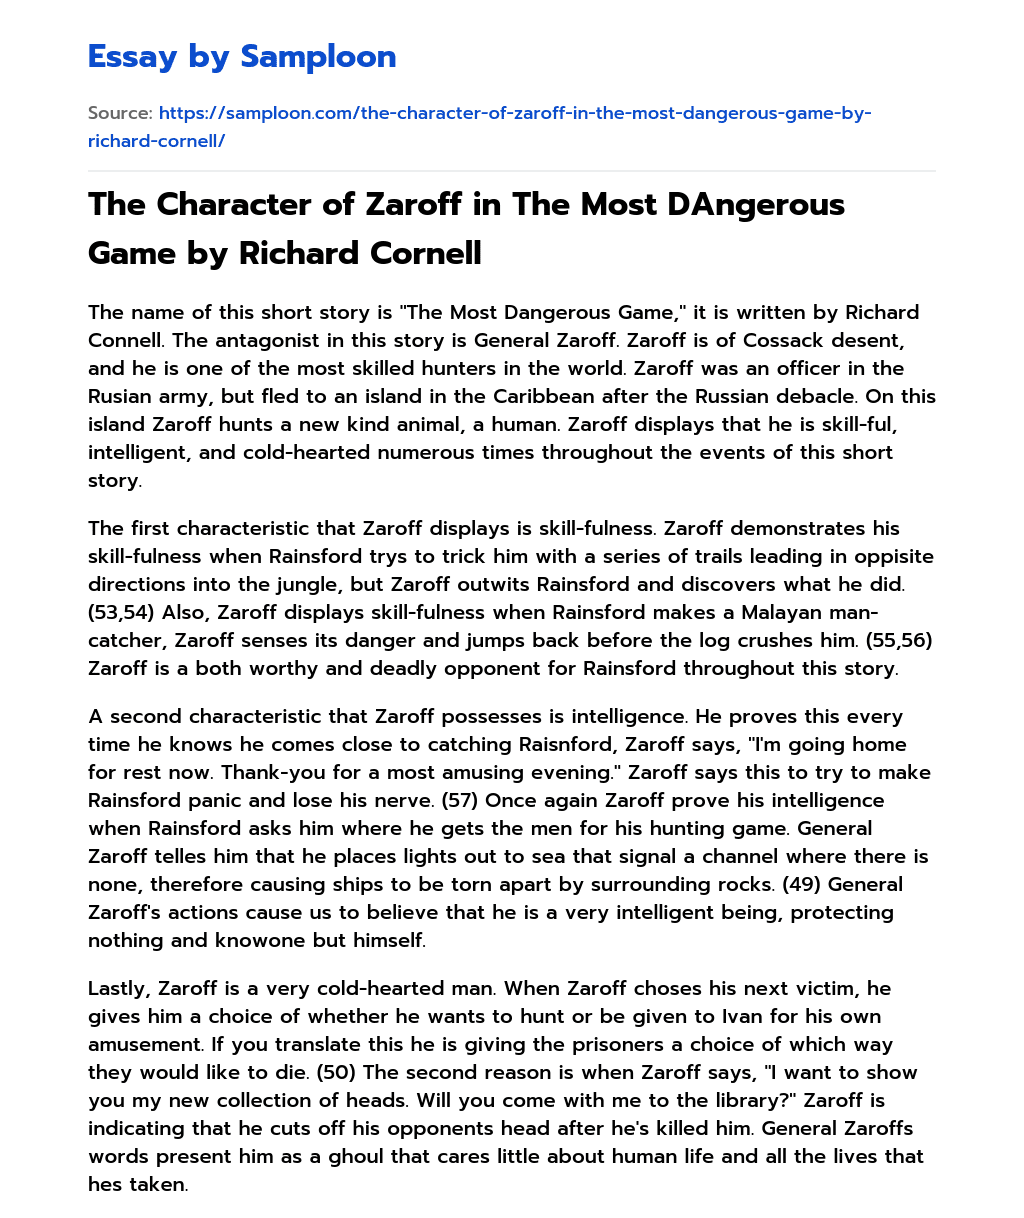 The Character of Zaroff in The Most DAngerous Game by Richard Cornell essay